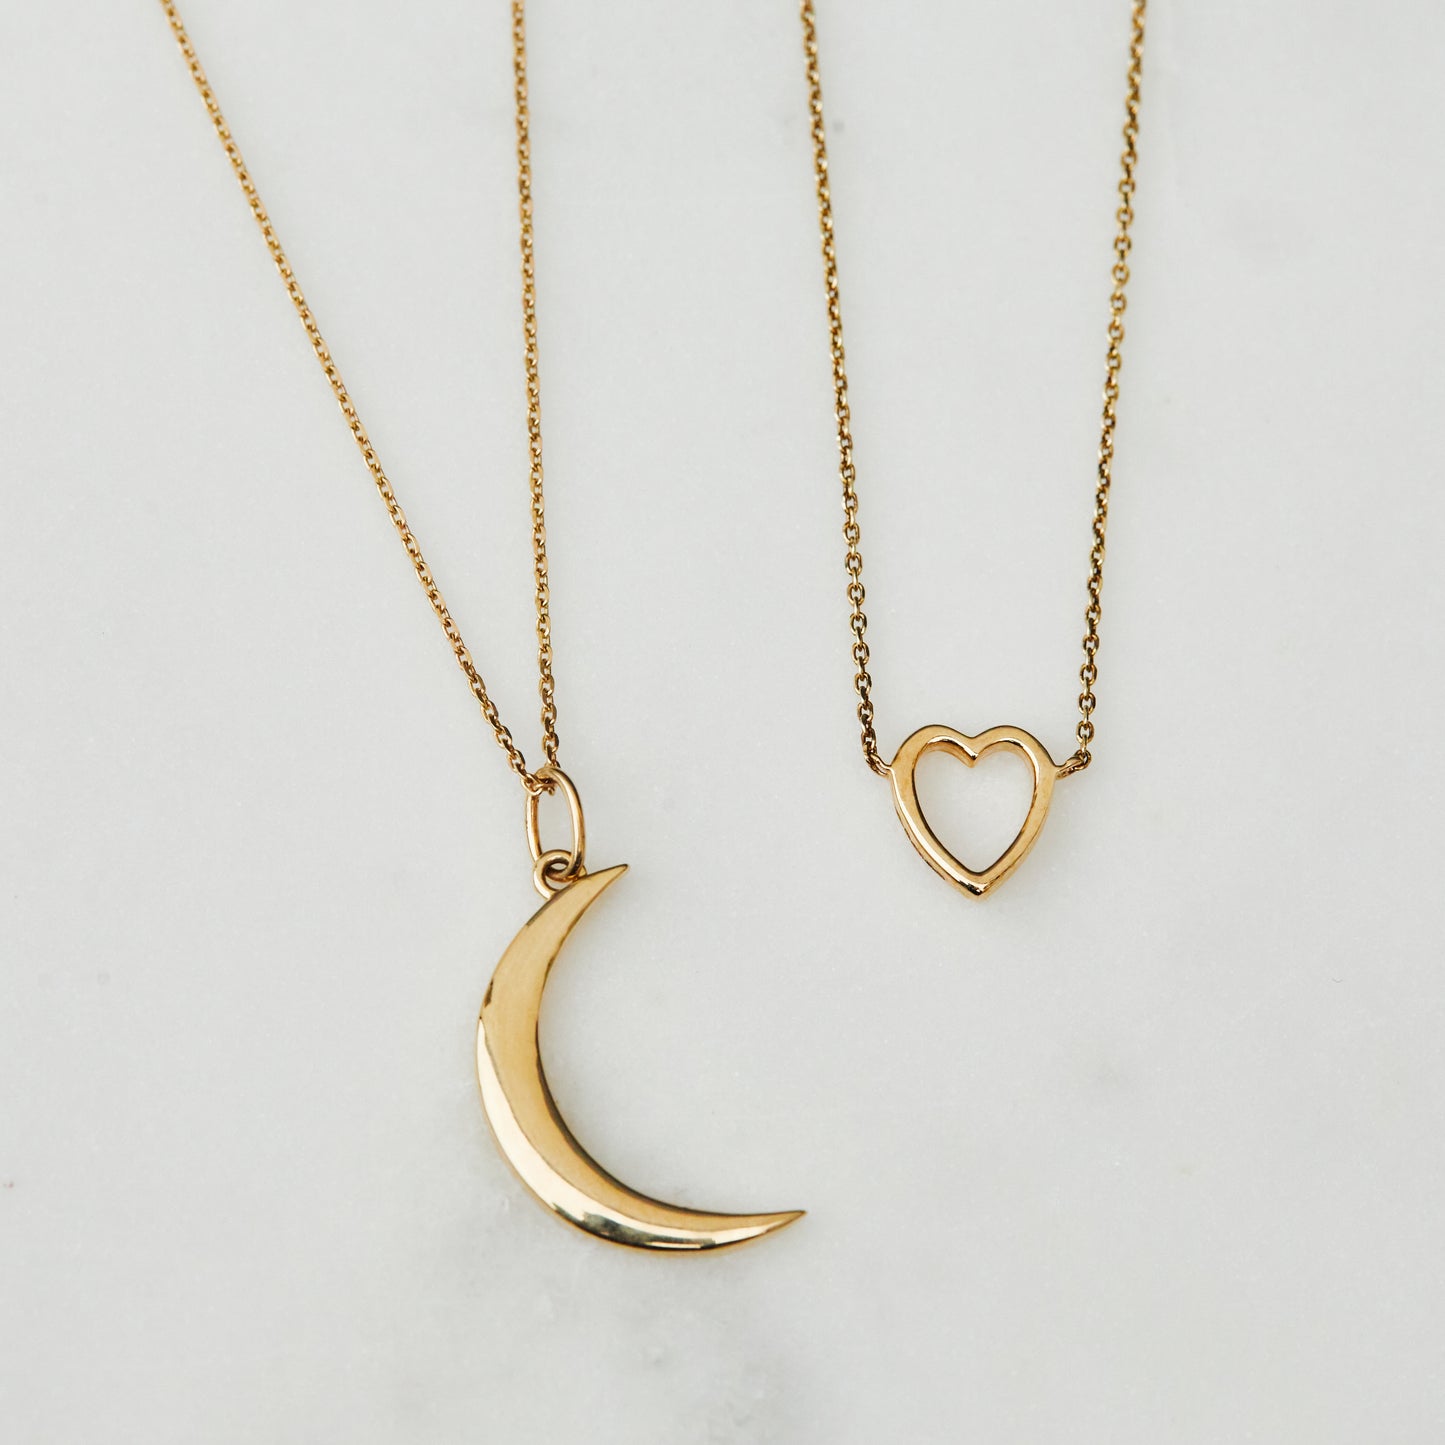 New Moon Necklace In 9K Solid Yellow Gold - Necklace - Carrie Elizabeth